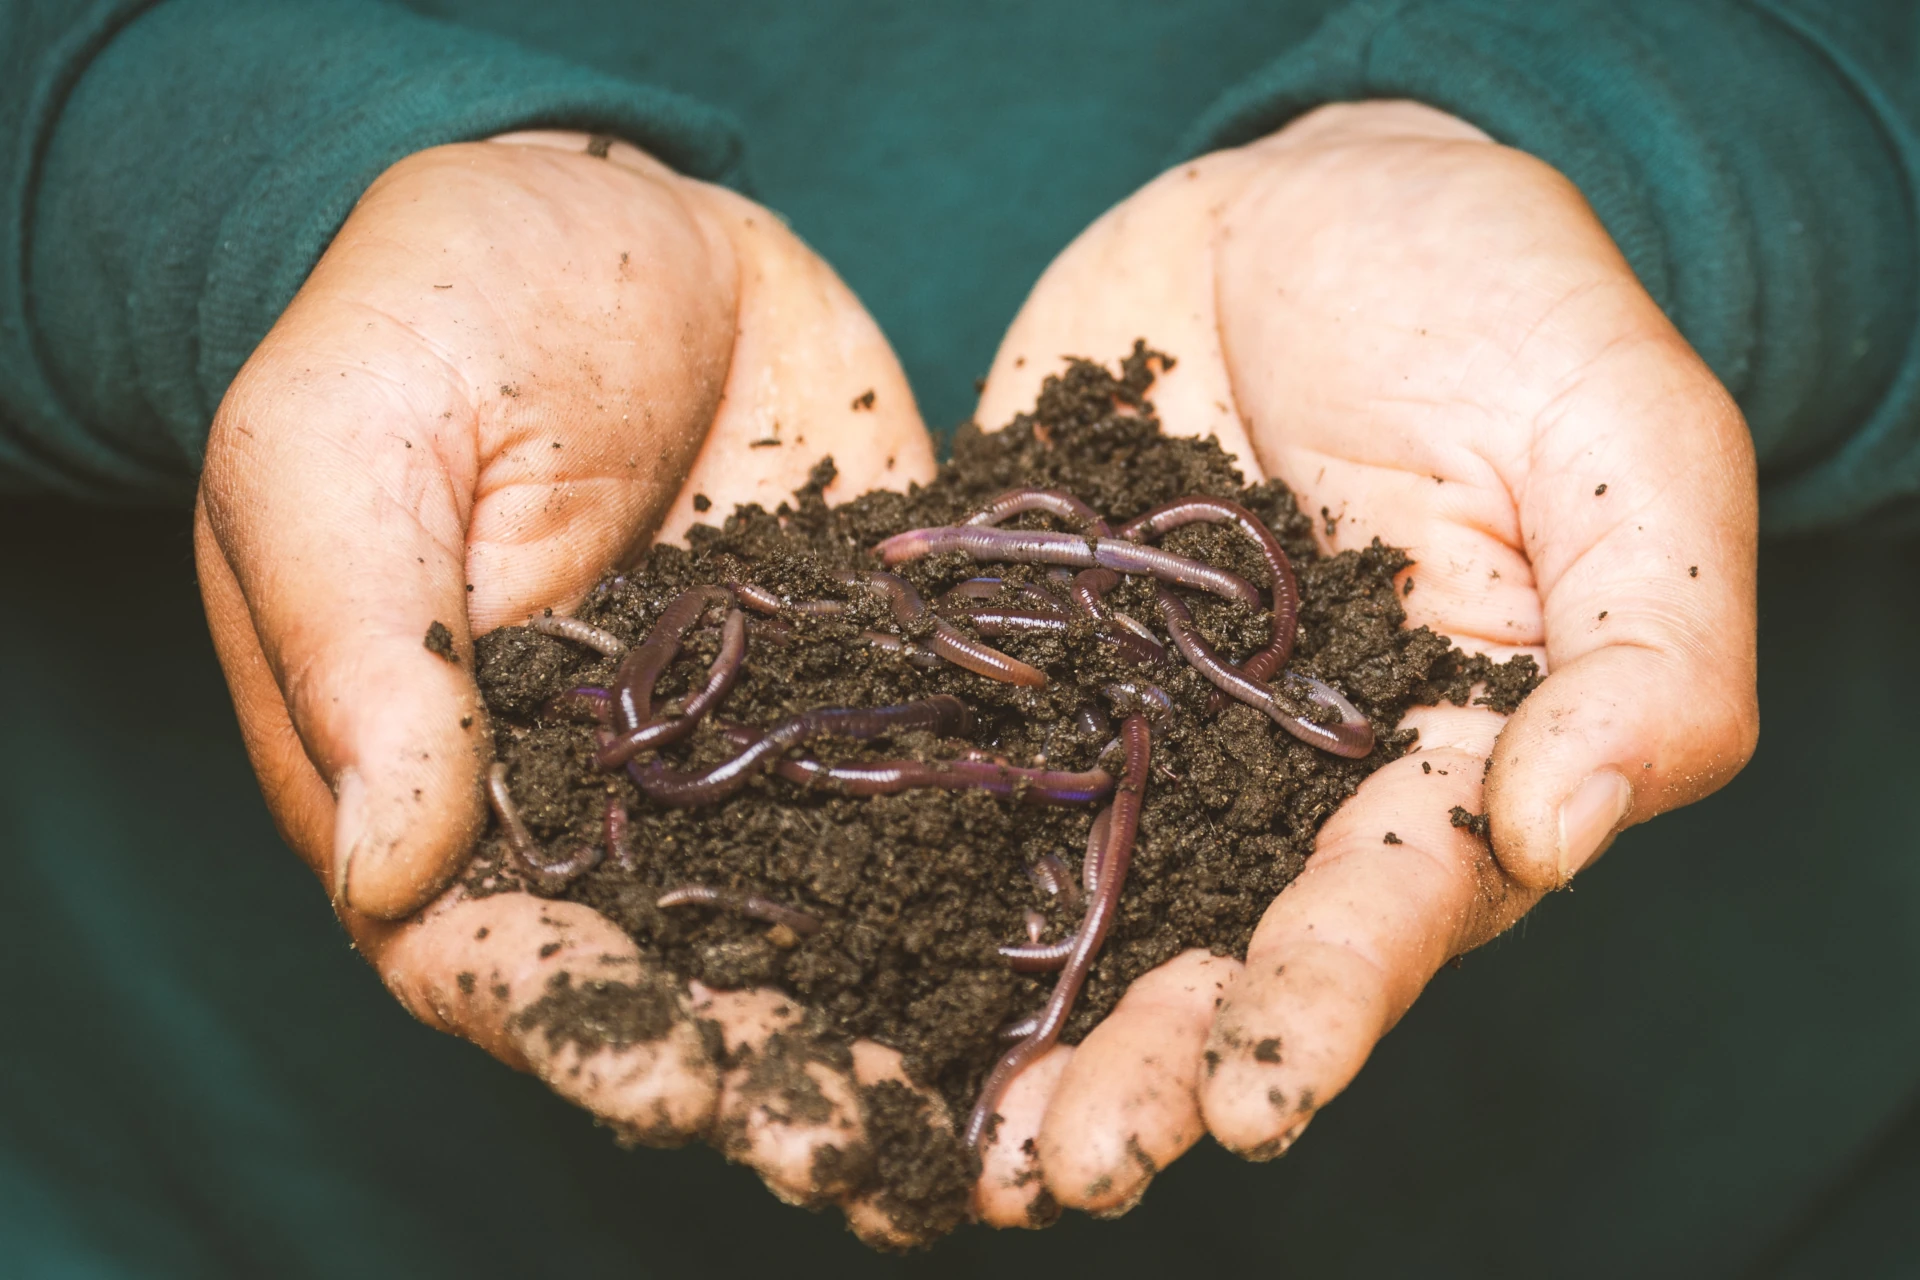 Worms play a crucial role in soil biology and are soil microbes key partner.